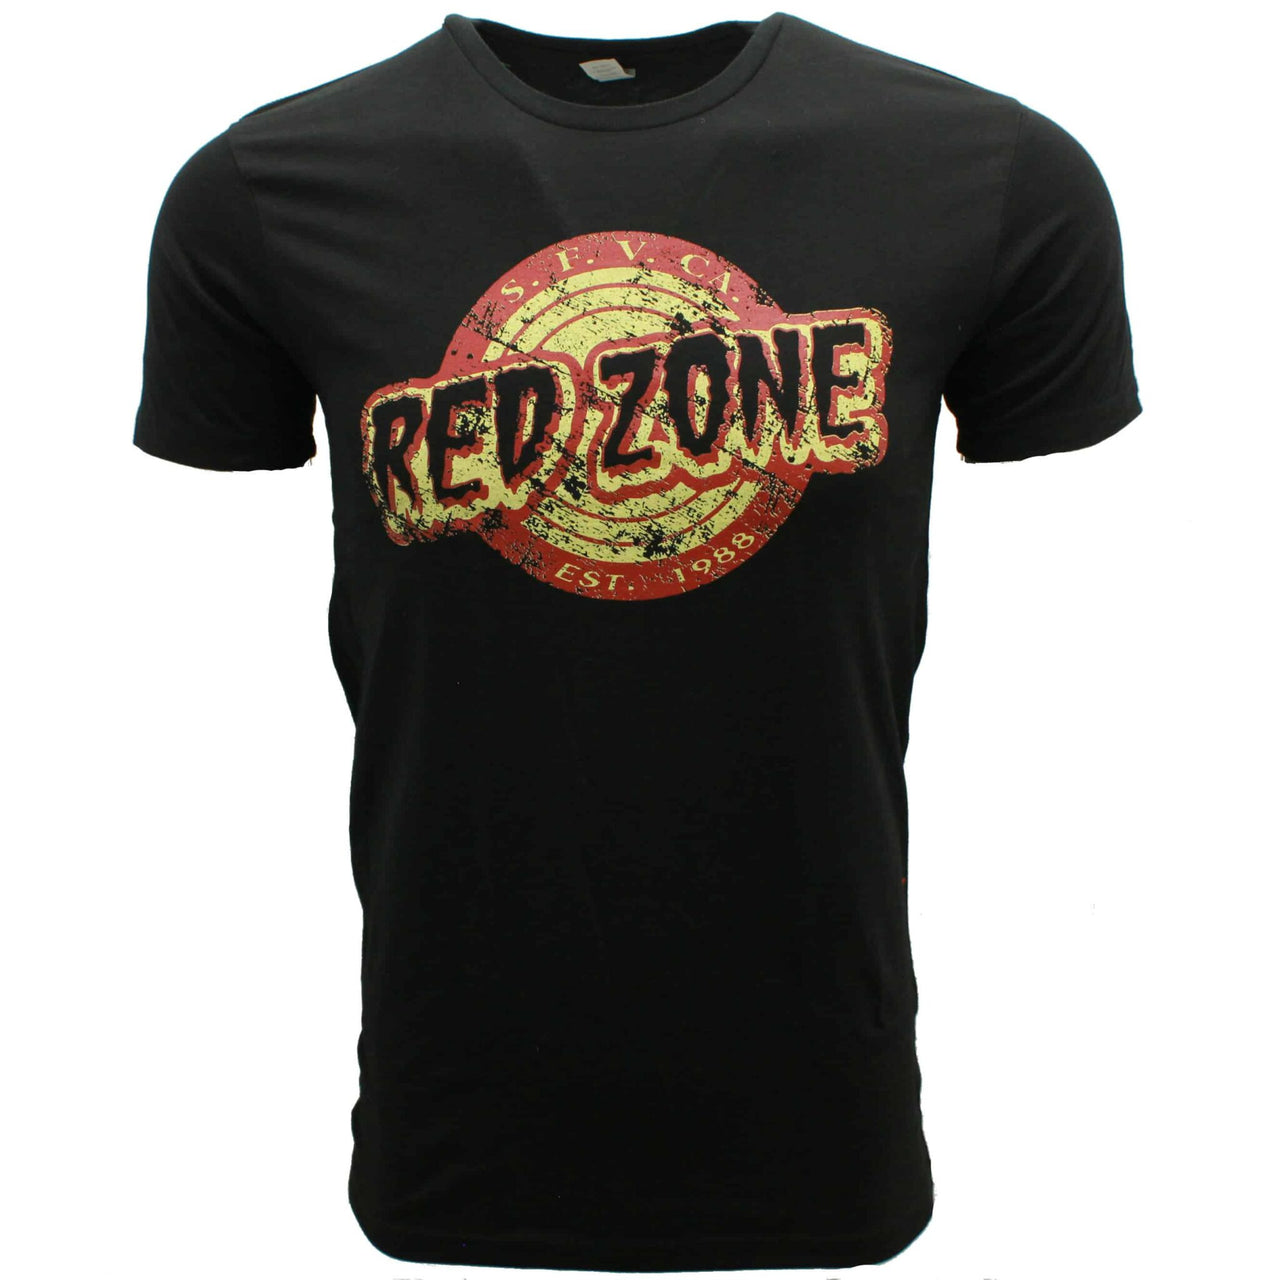 Red Zone Shop T-Shirt